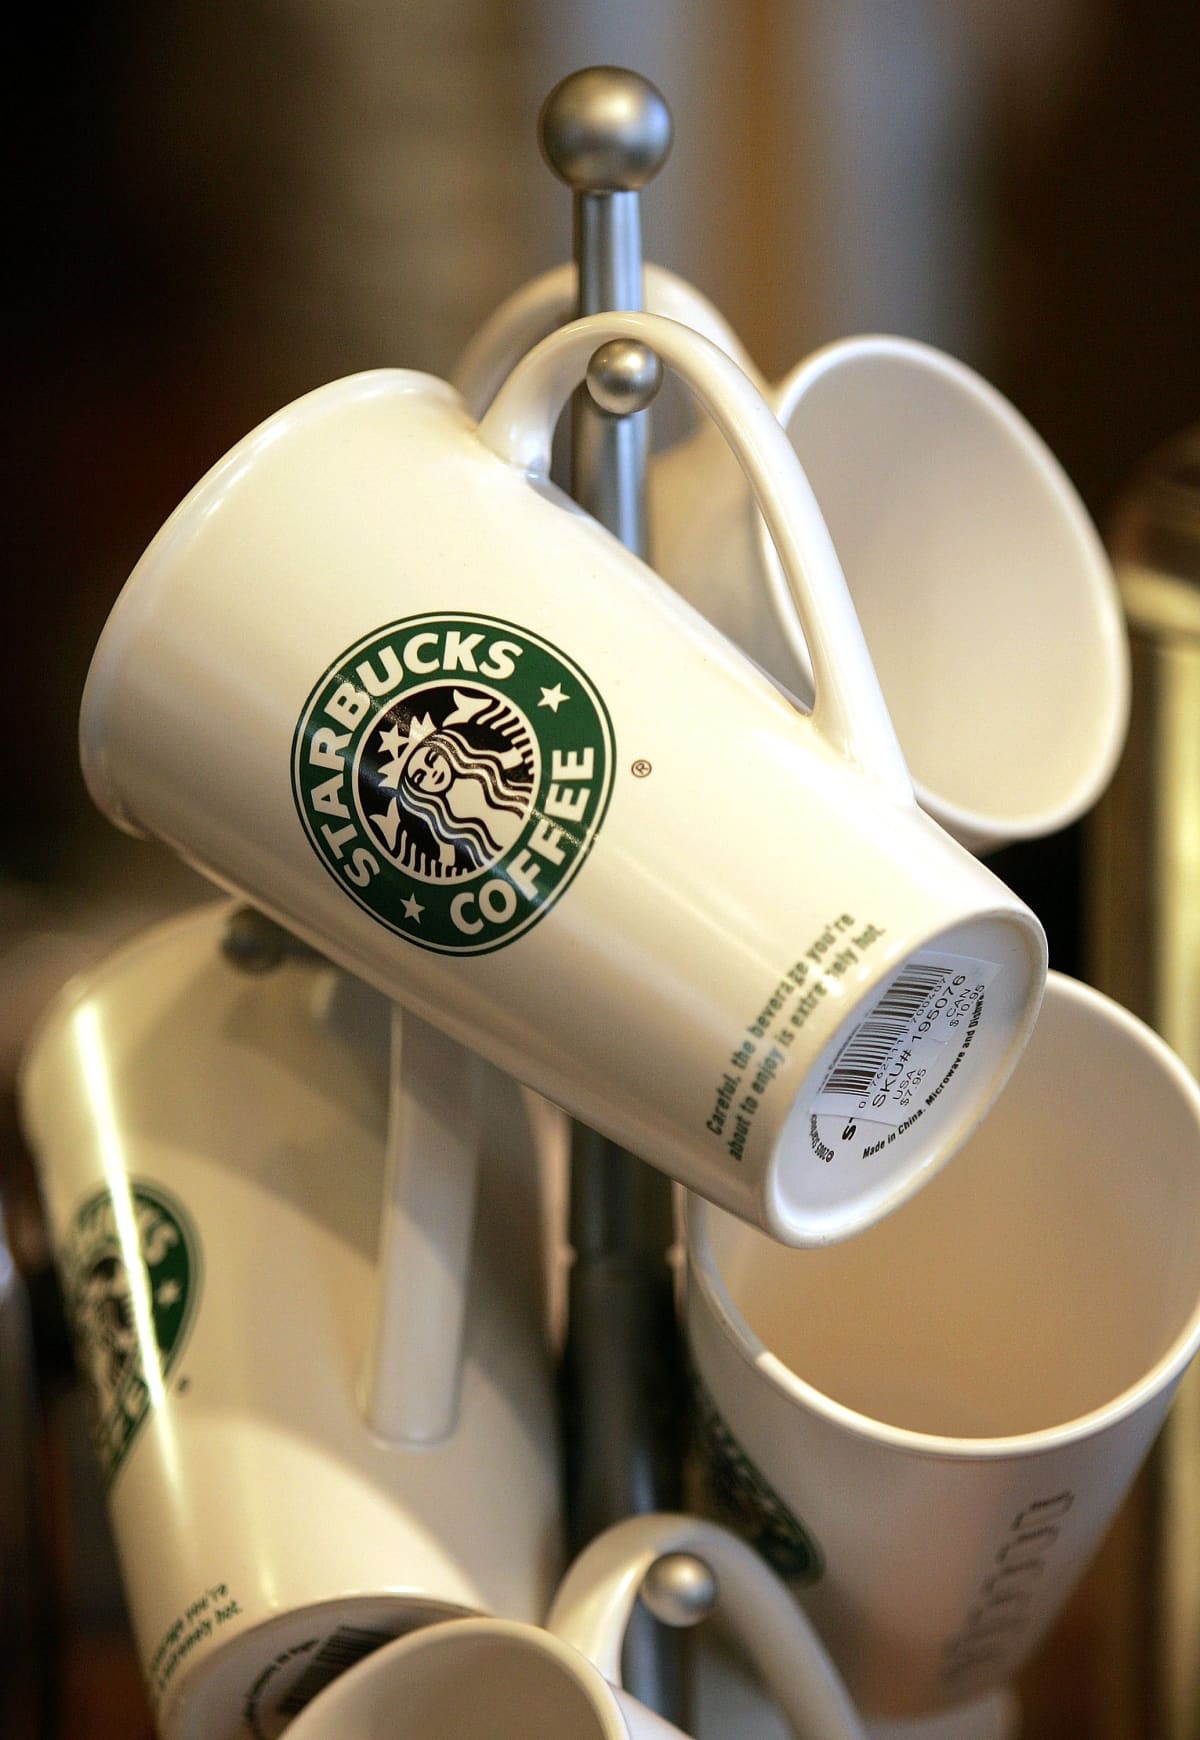 Starbucks coffee mugs are displayed for sale at a Starbucks store 